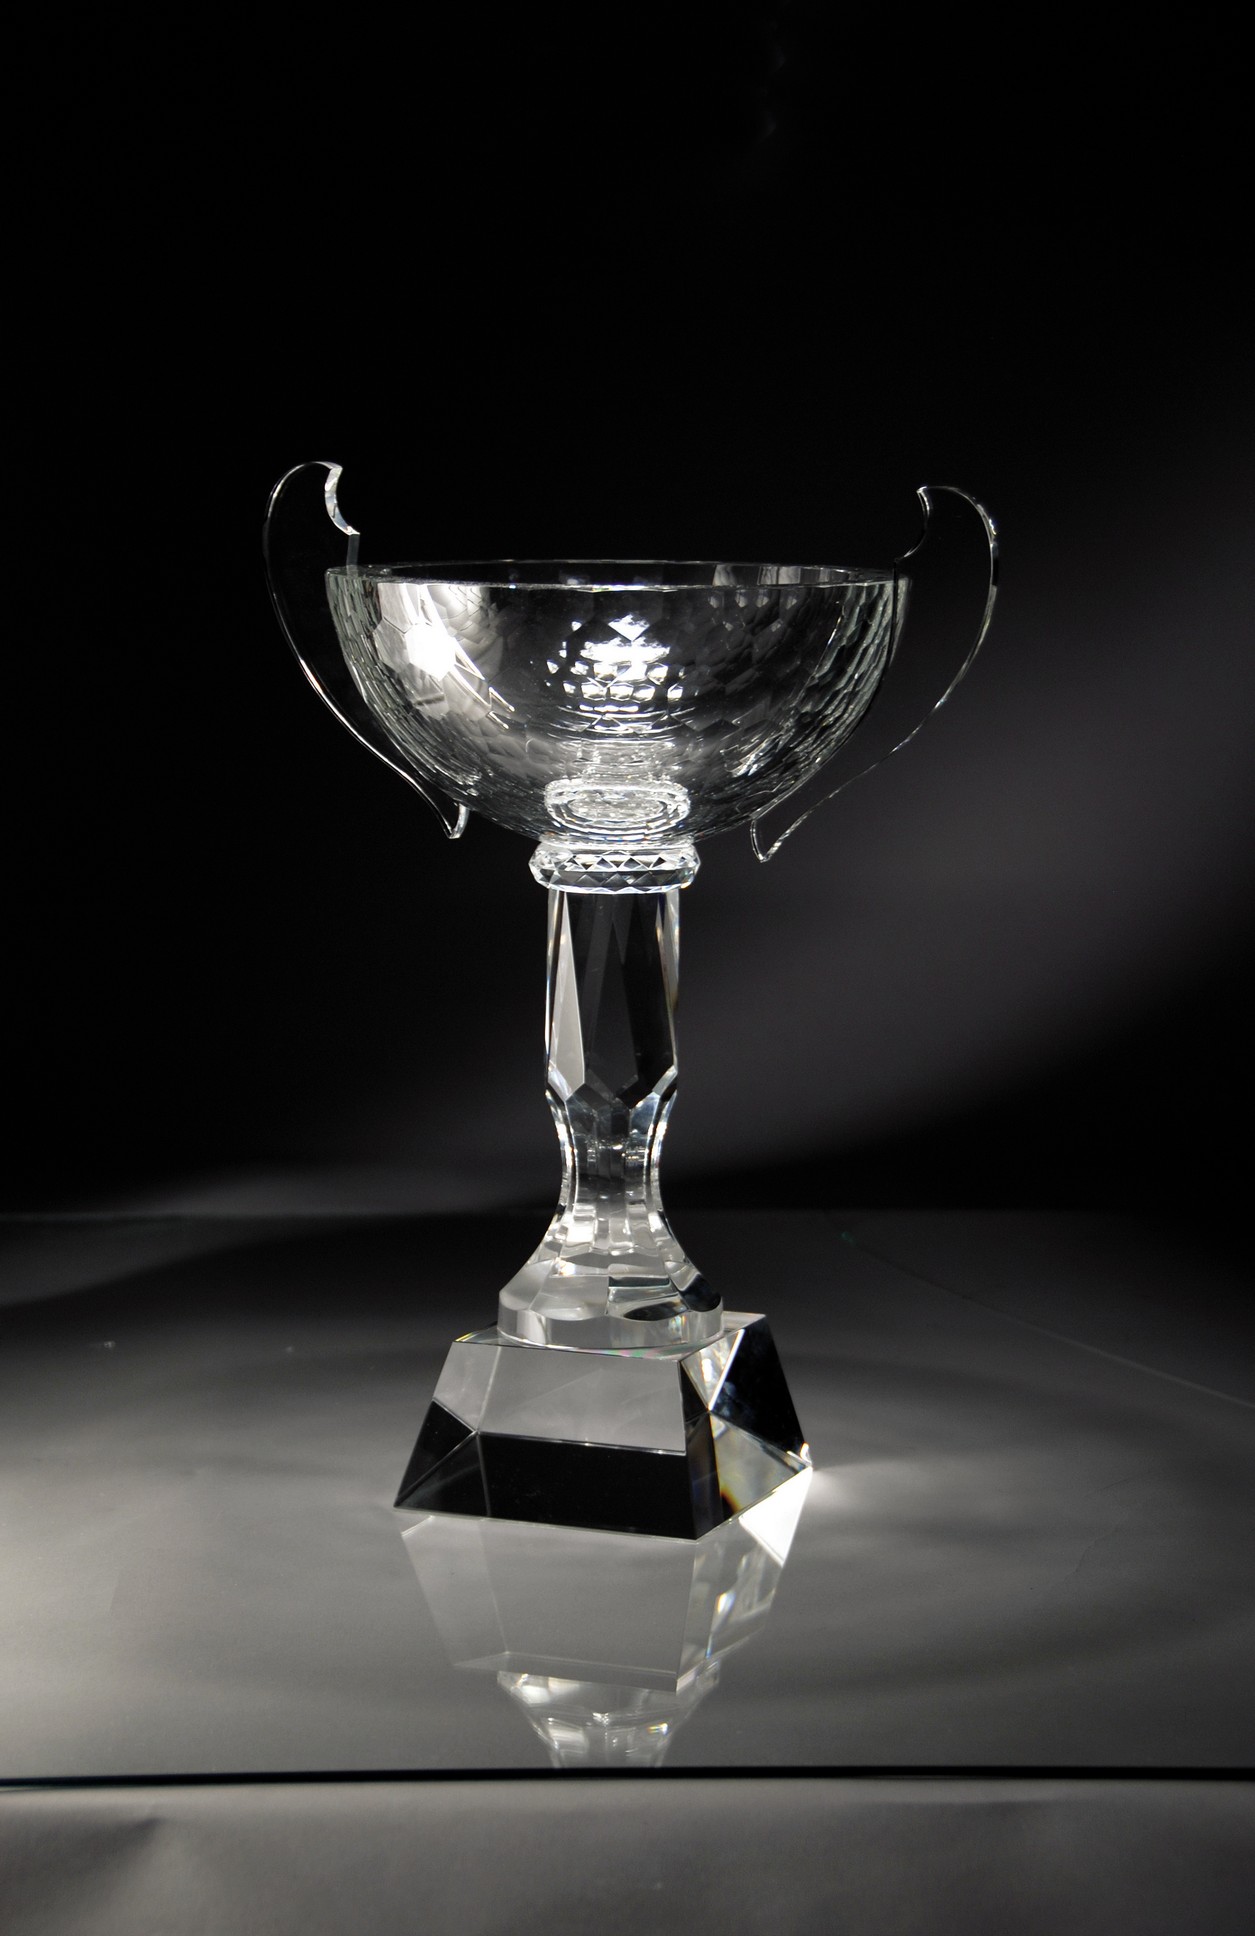 Is it time to recognize someone in your company? Our black crystal awards collection is full of dynamic awards. Check out 4 of our favorite designs.